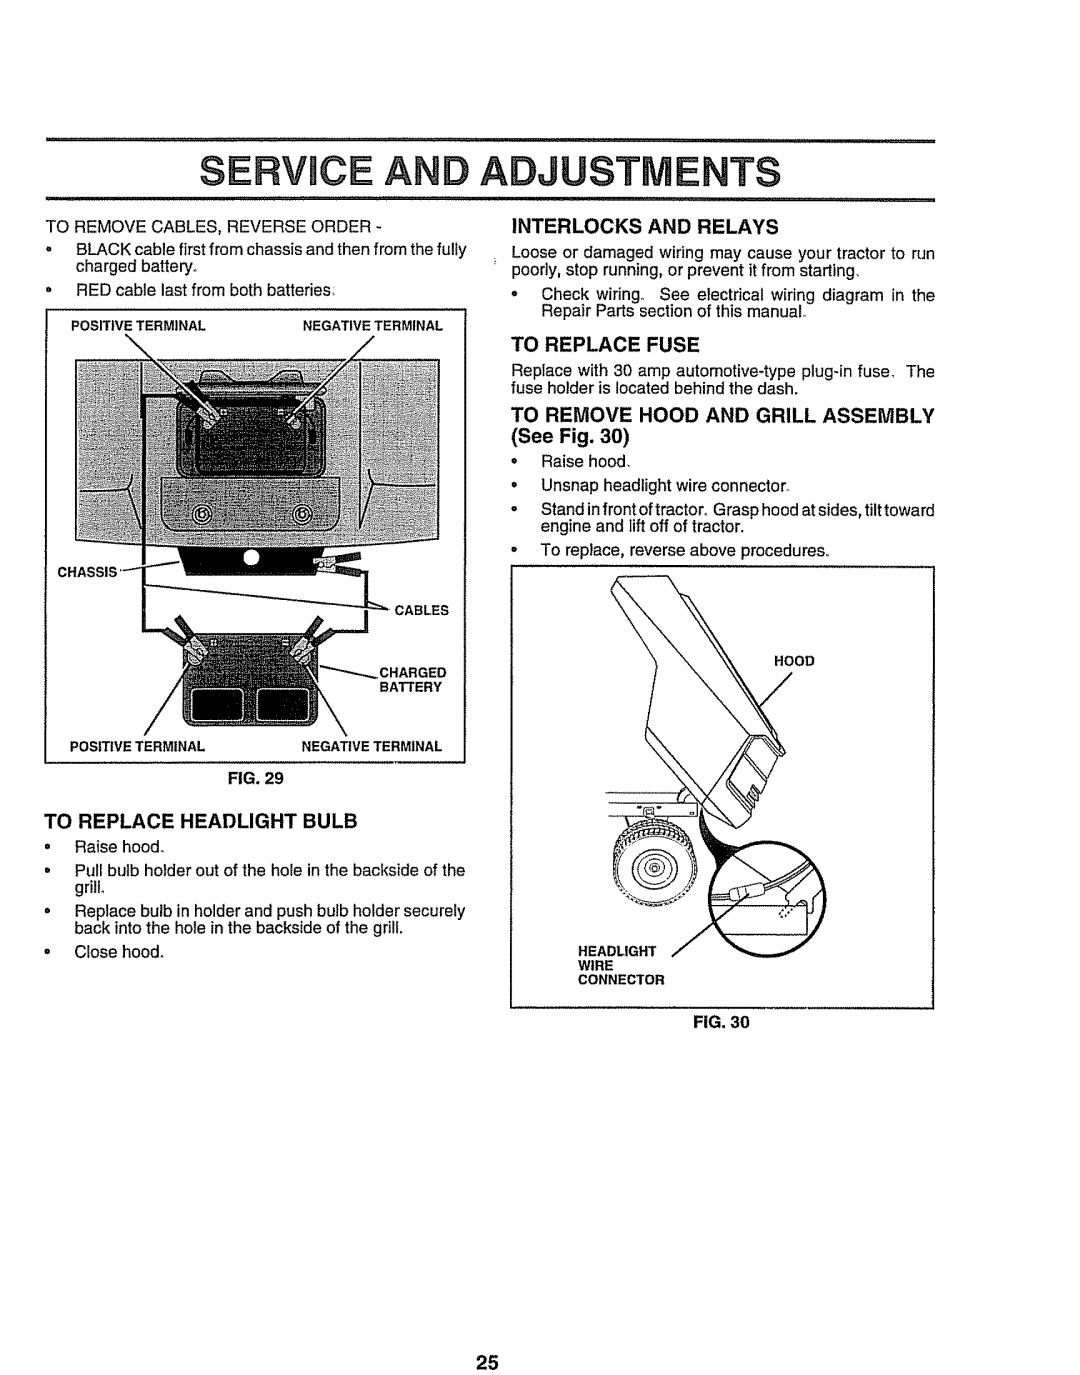 Sears 917.258473 ViCE AN ADJU ENTS, Interlocks And Relays, To Replace Fuse, TO REMOVE HOOD AND GRILL ASSEMBLY See Fig 